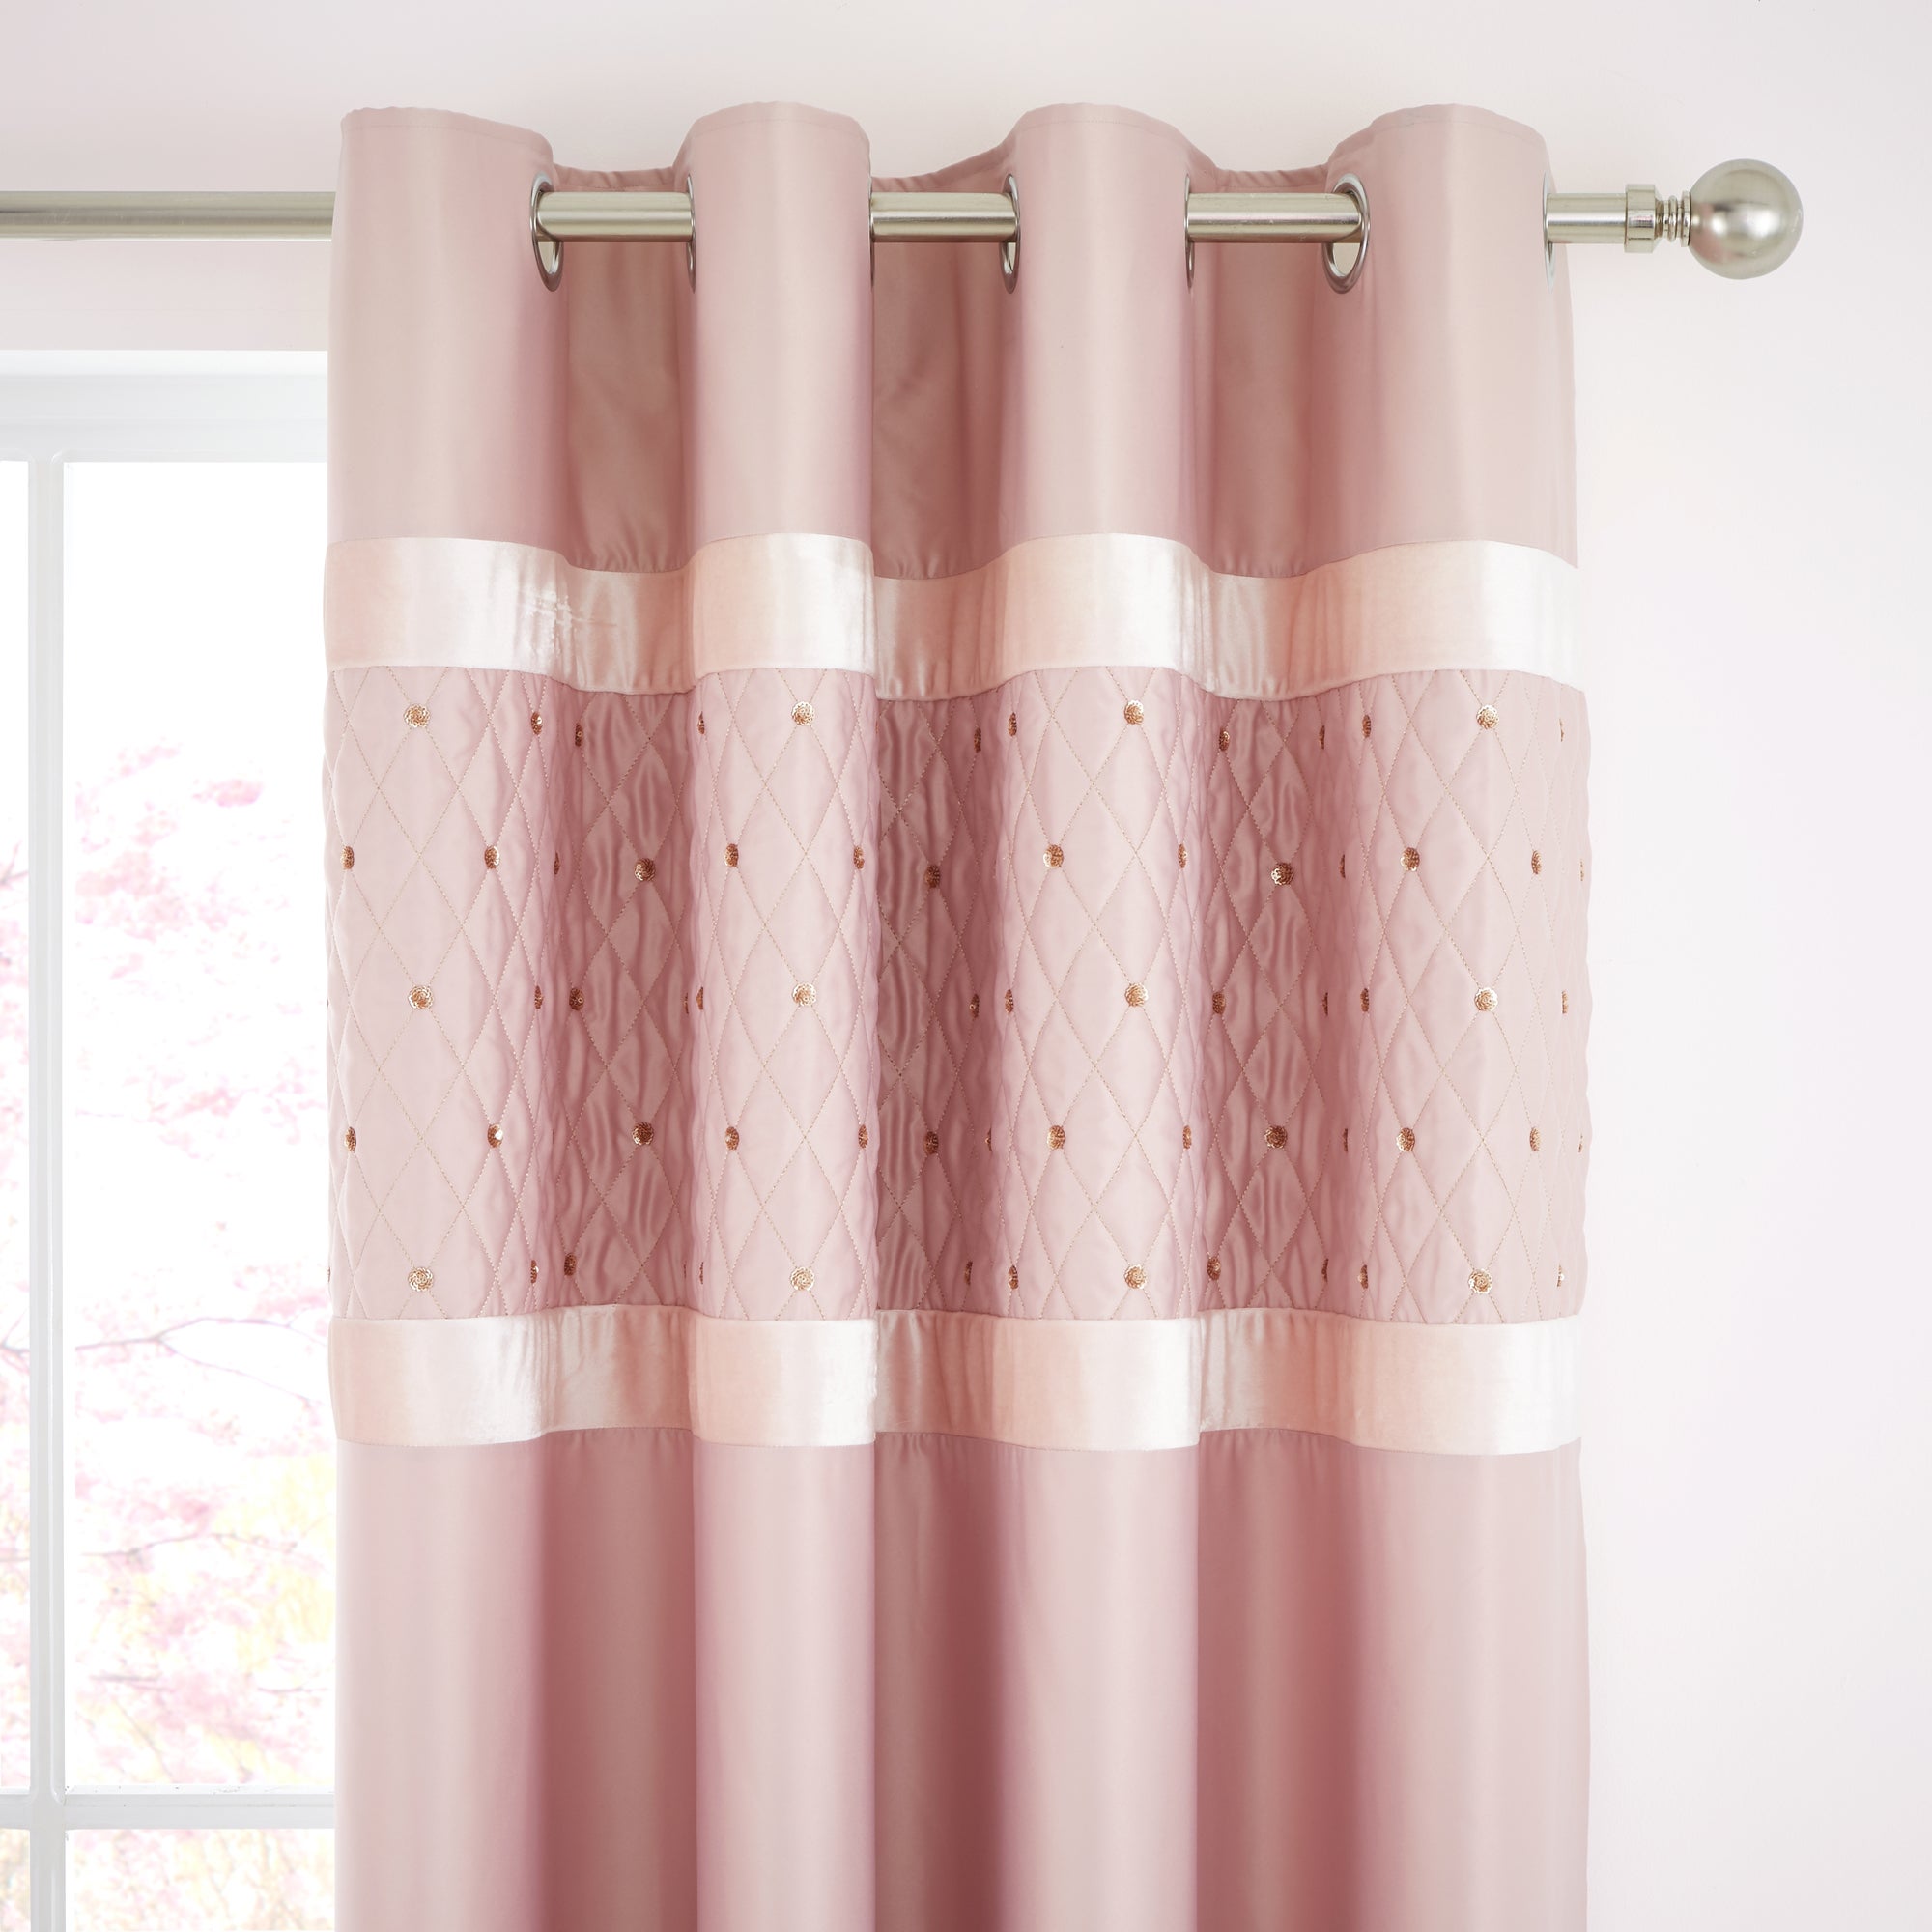 Photos - Curtains & Drapes Catherine Lansfield Blush Sequin Cluster Eyelet Curtains Pink 